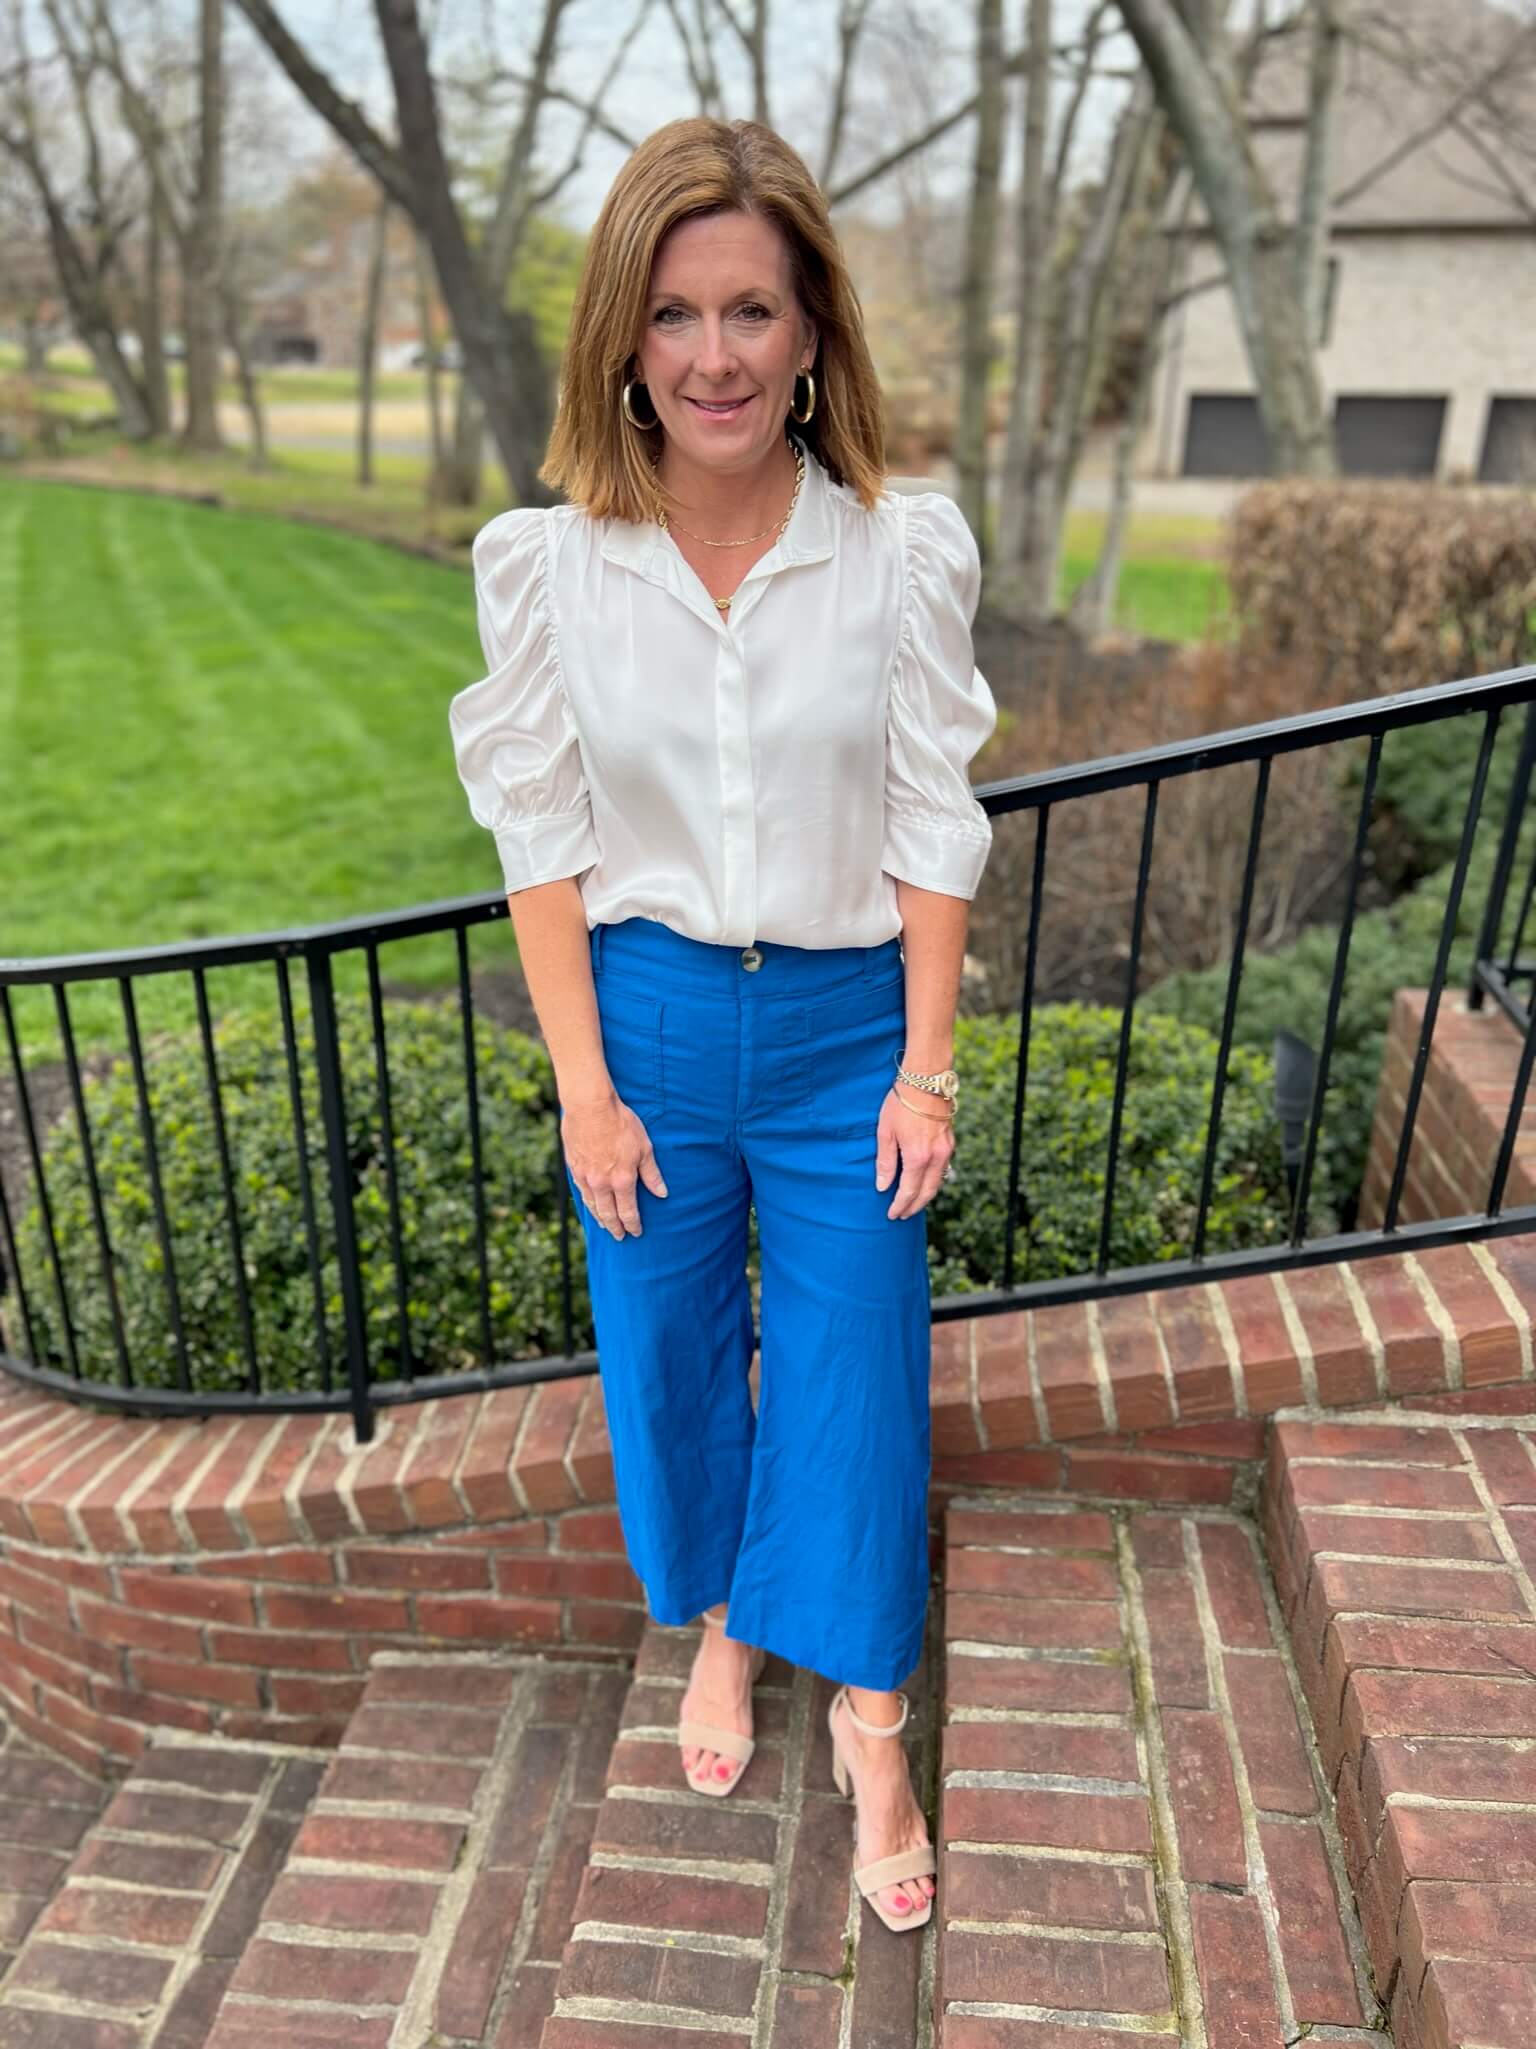 Ivory Short Sleeve Blouse & Blue Wide Leg Pants styling white and blue together nashville stylists share tips on wearing white and blue together fun looks for the office what to wear to the office